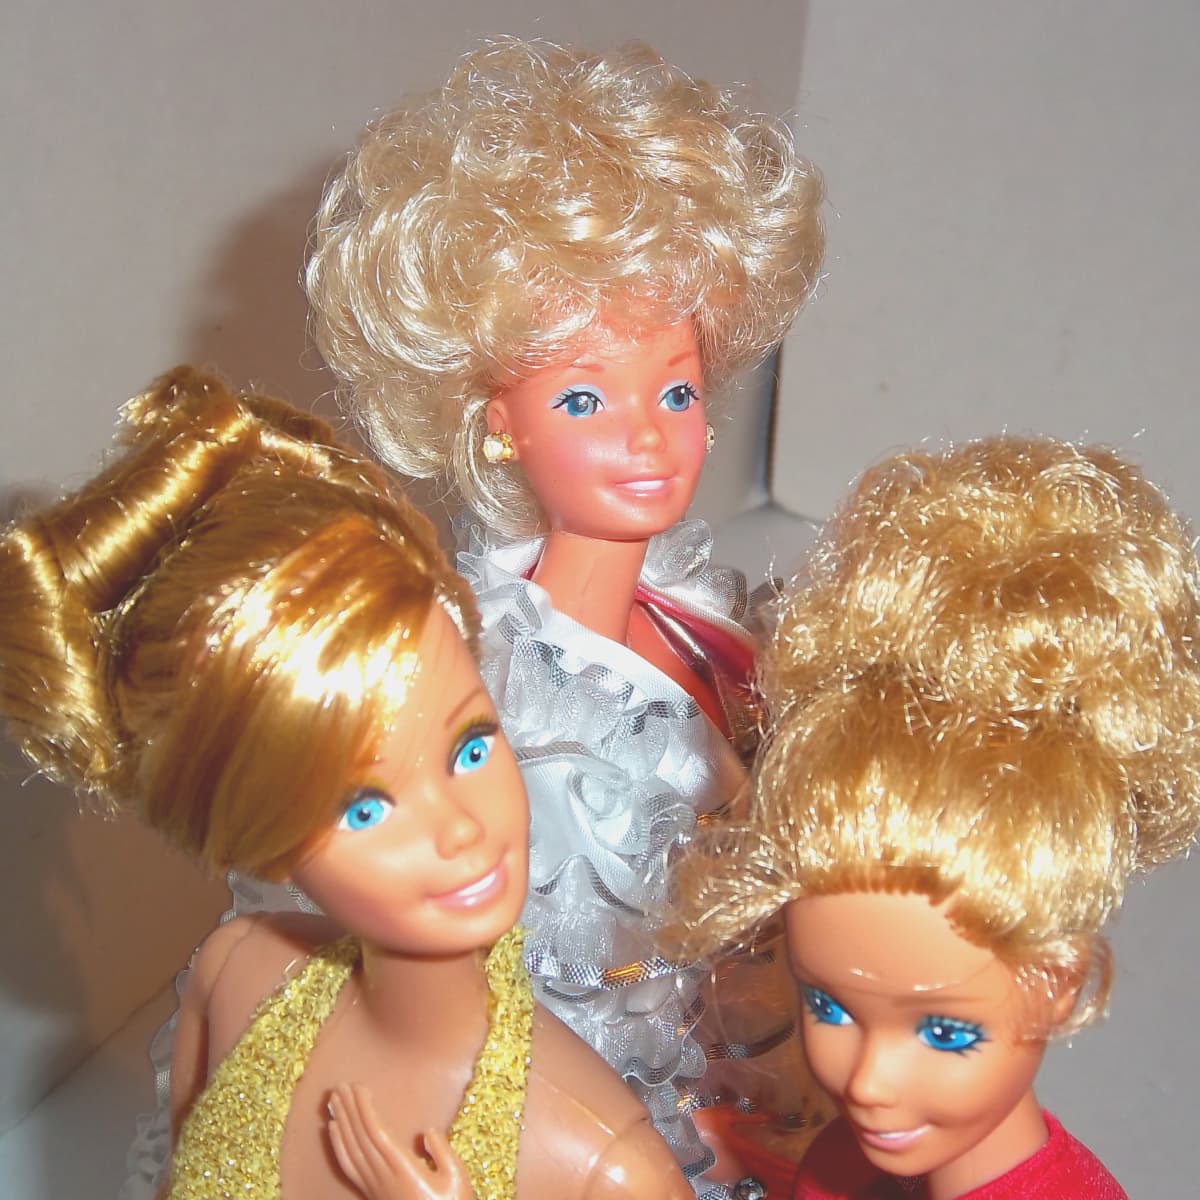 Barbie Doll Hair Styling Ideas and Tips - HubPages